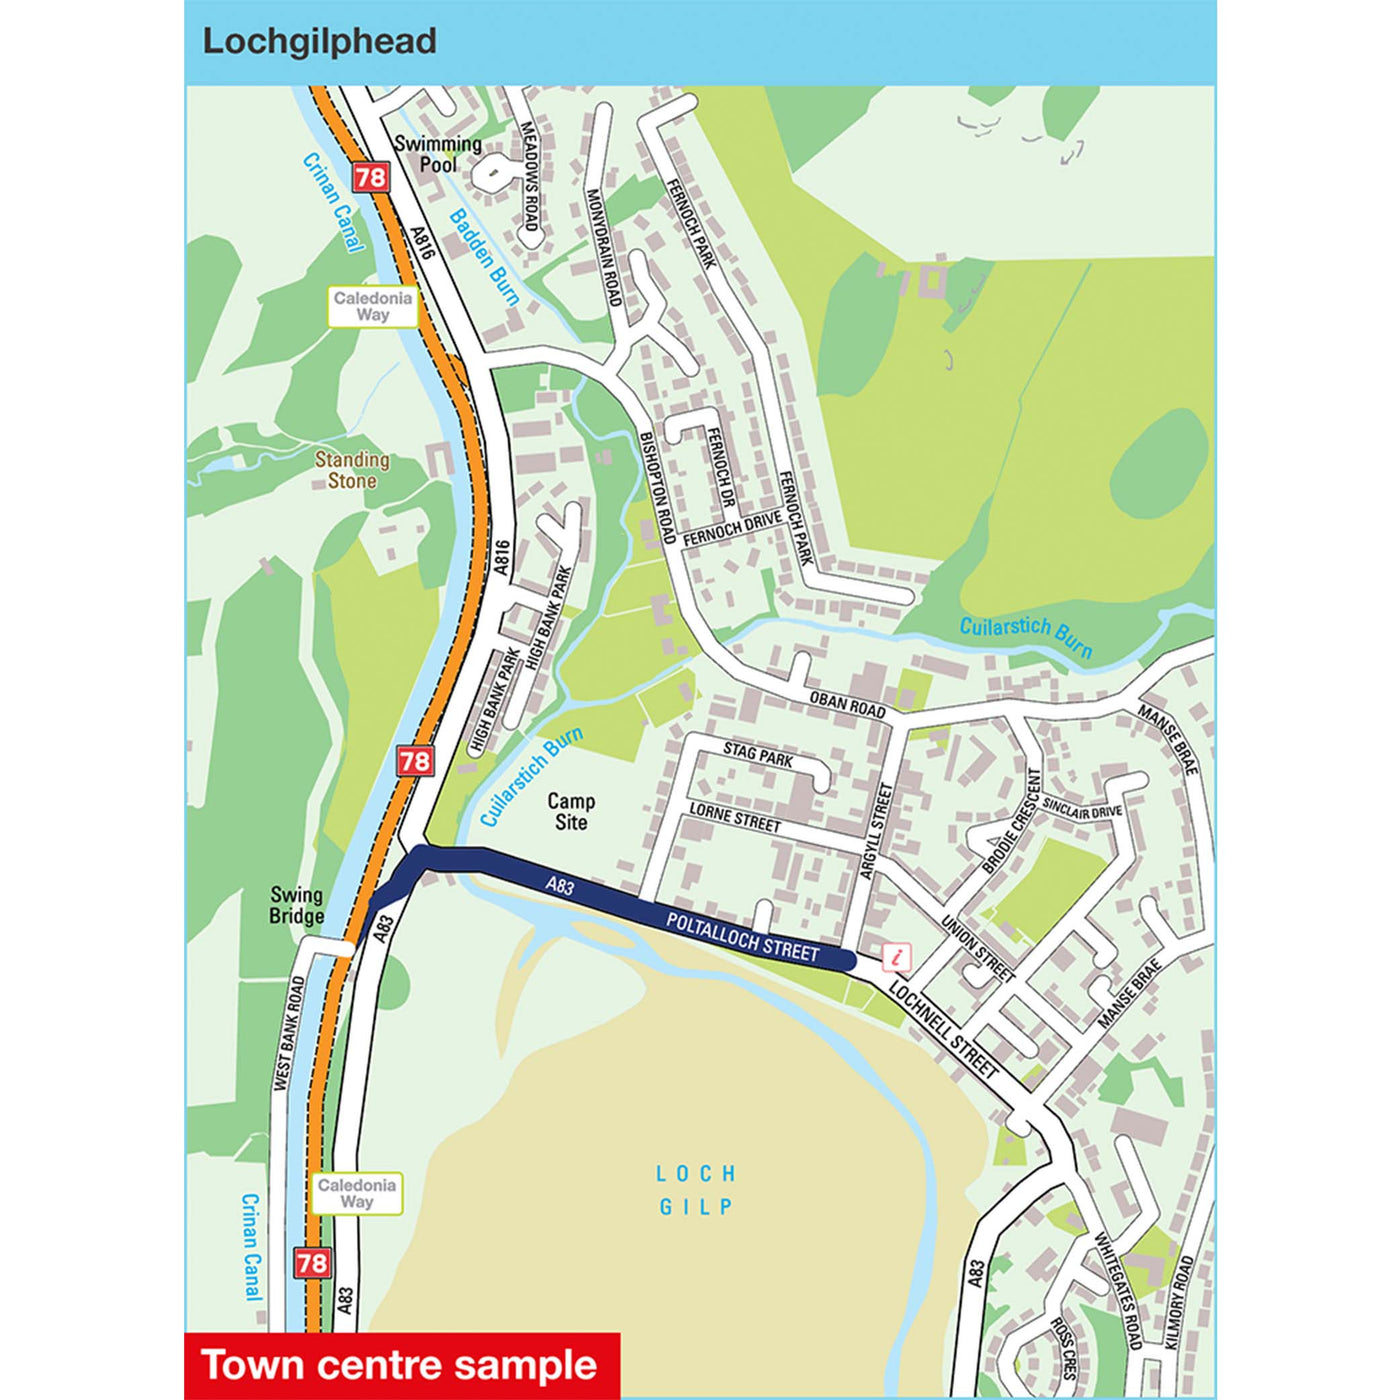 Town centre sample: Lochgilphead, featuring route 78